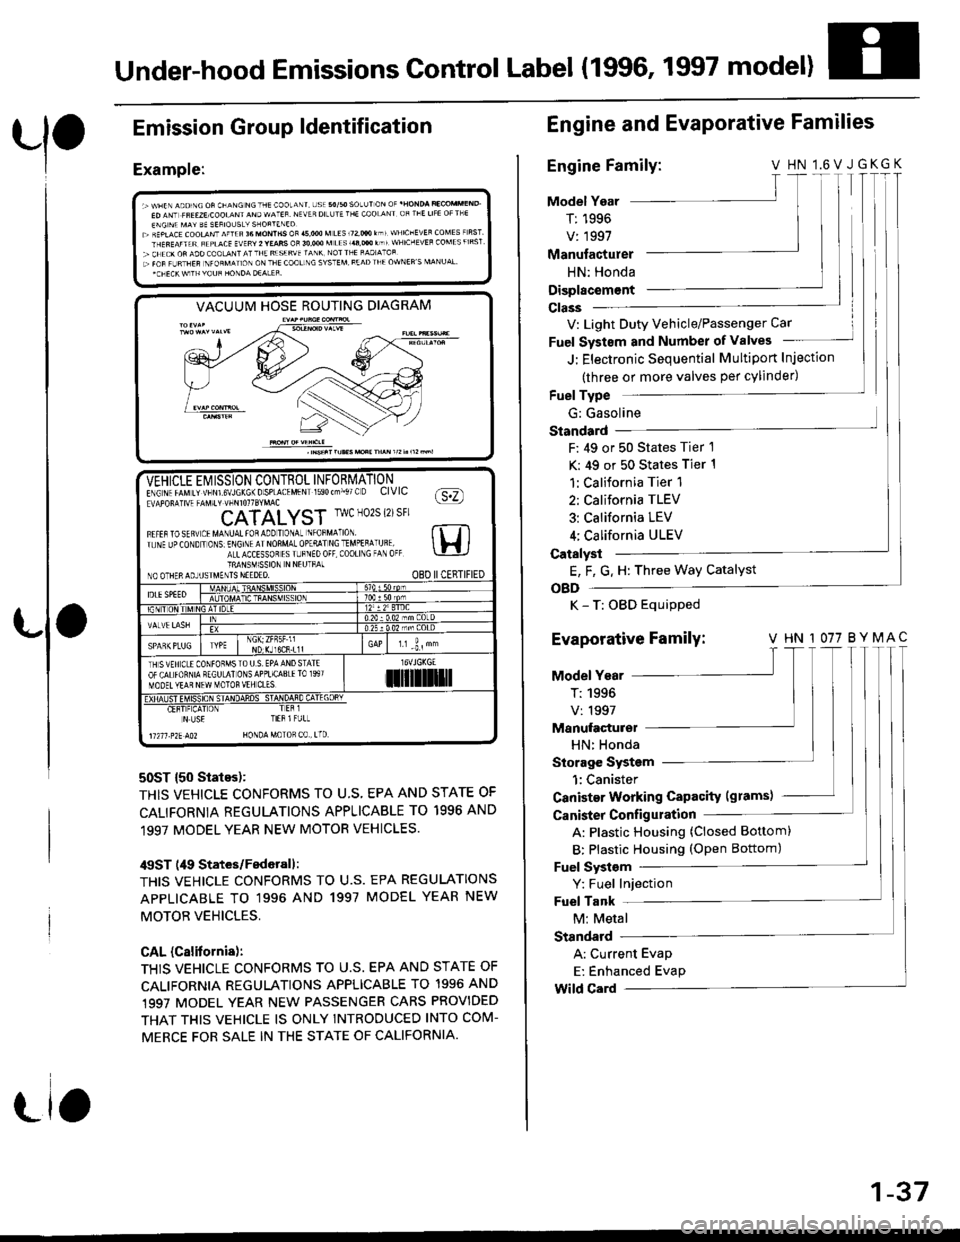 HONDA CIVIC 1999 6.G Workshop Manual Under-hood Emissions Control Label (1996, 1997 model)
Emission
Example:
Group ldentification
VACUUM HOSE ROUTING DIAGRAM
50ST {50 States):
THIS VEHICLE CONFORMS TO U.S, EPA AND STATE OF
CALIFORNIA REG